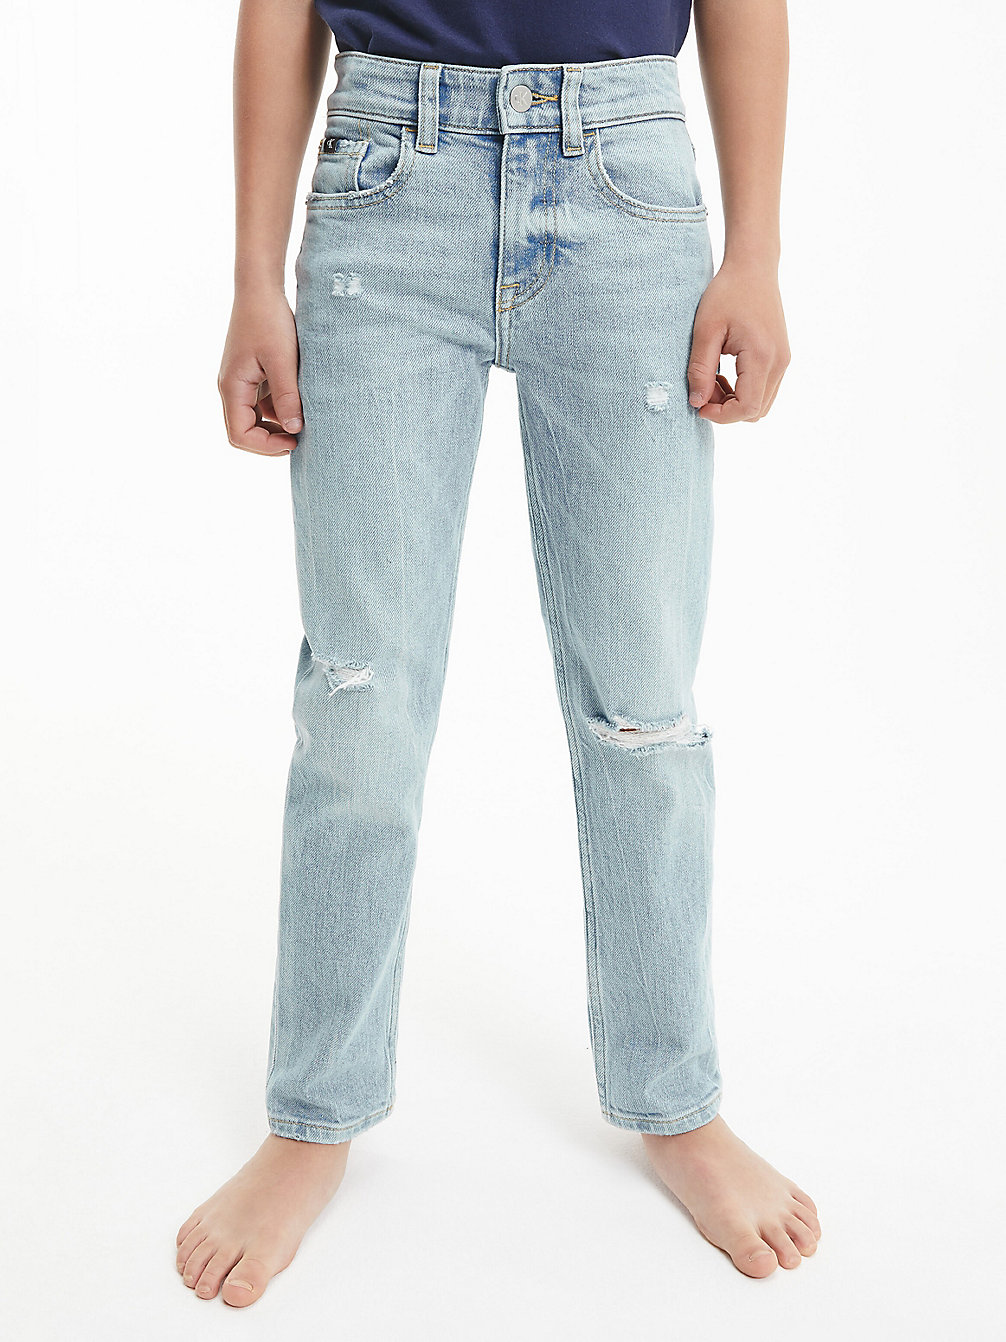 Mid Rise Straight Jeans Strappati > DESTROY LIGHT BLUE > undefined boys > Calvin Klein